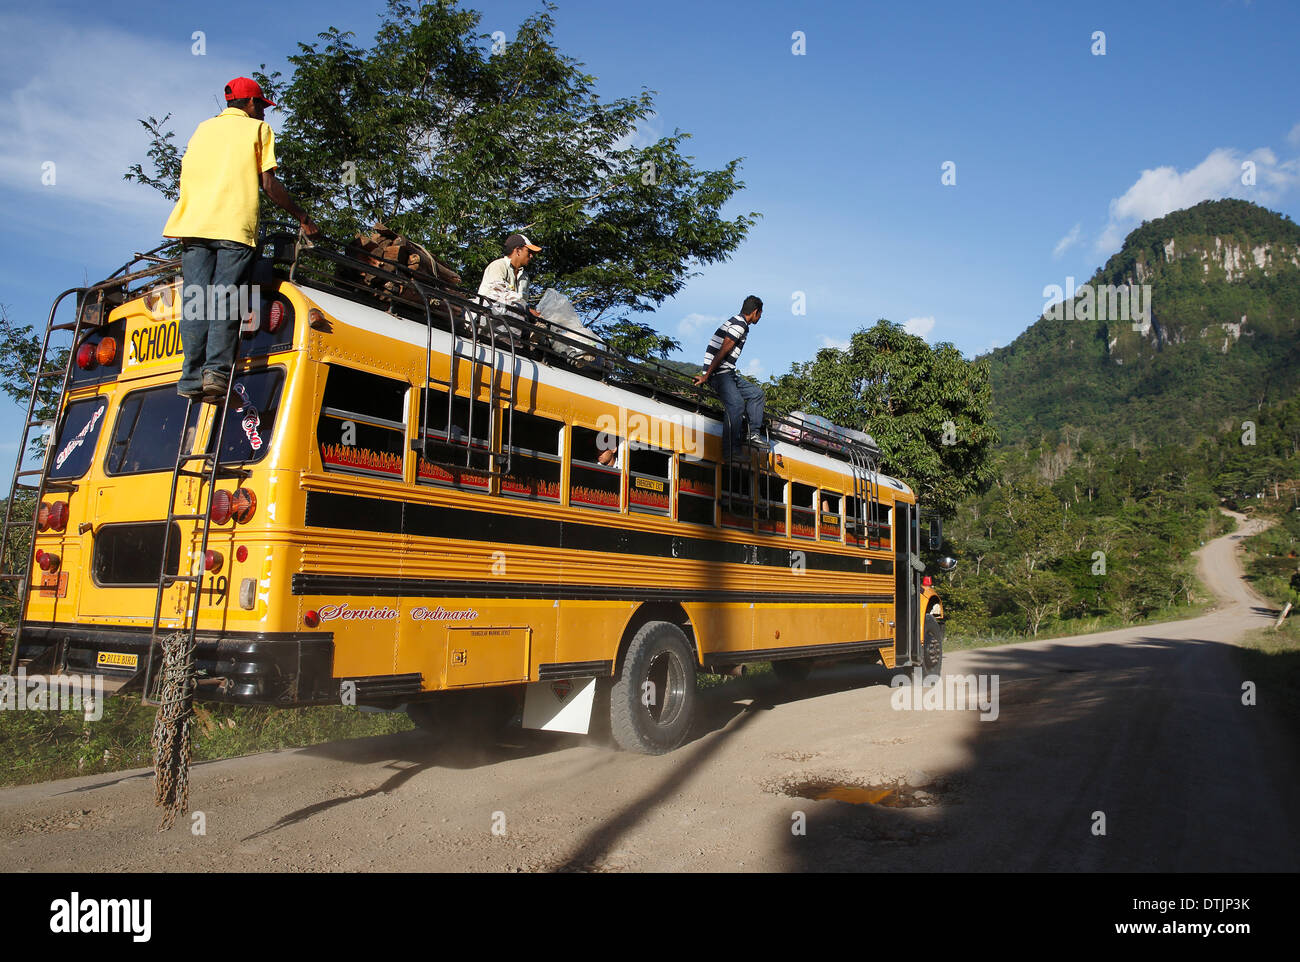 Yellow school bus used as local transport on the road in Penas Blancas, Nicaragua Stock Photo